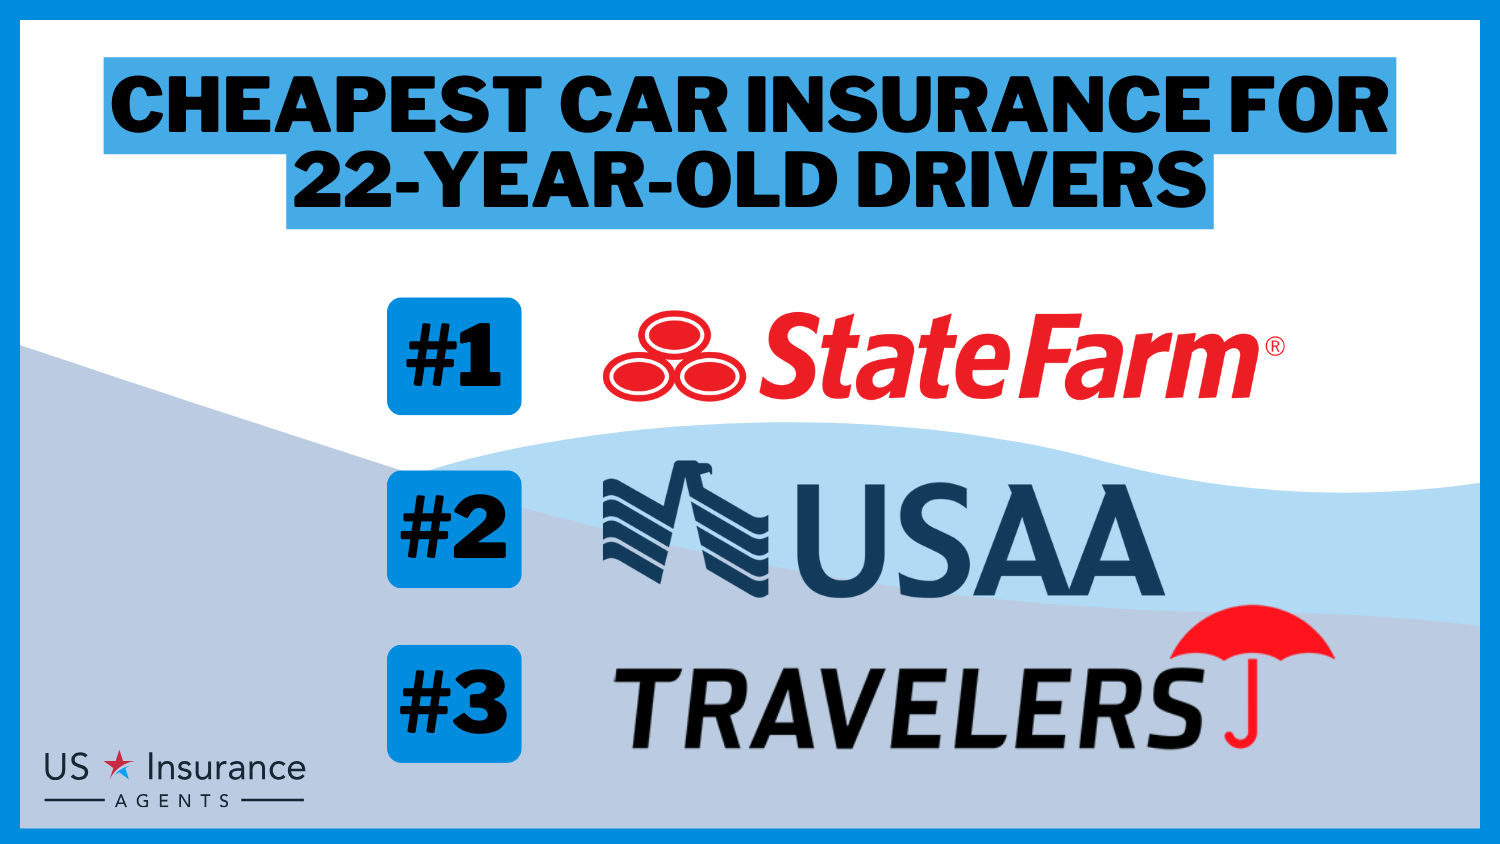 State Farm, USAA, Travelers: Cheapest Car Insurance for 22-Year-Old Drivers